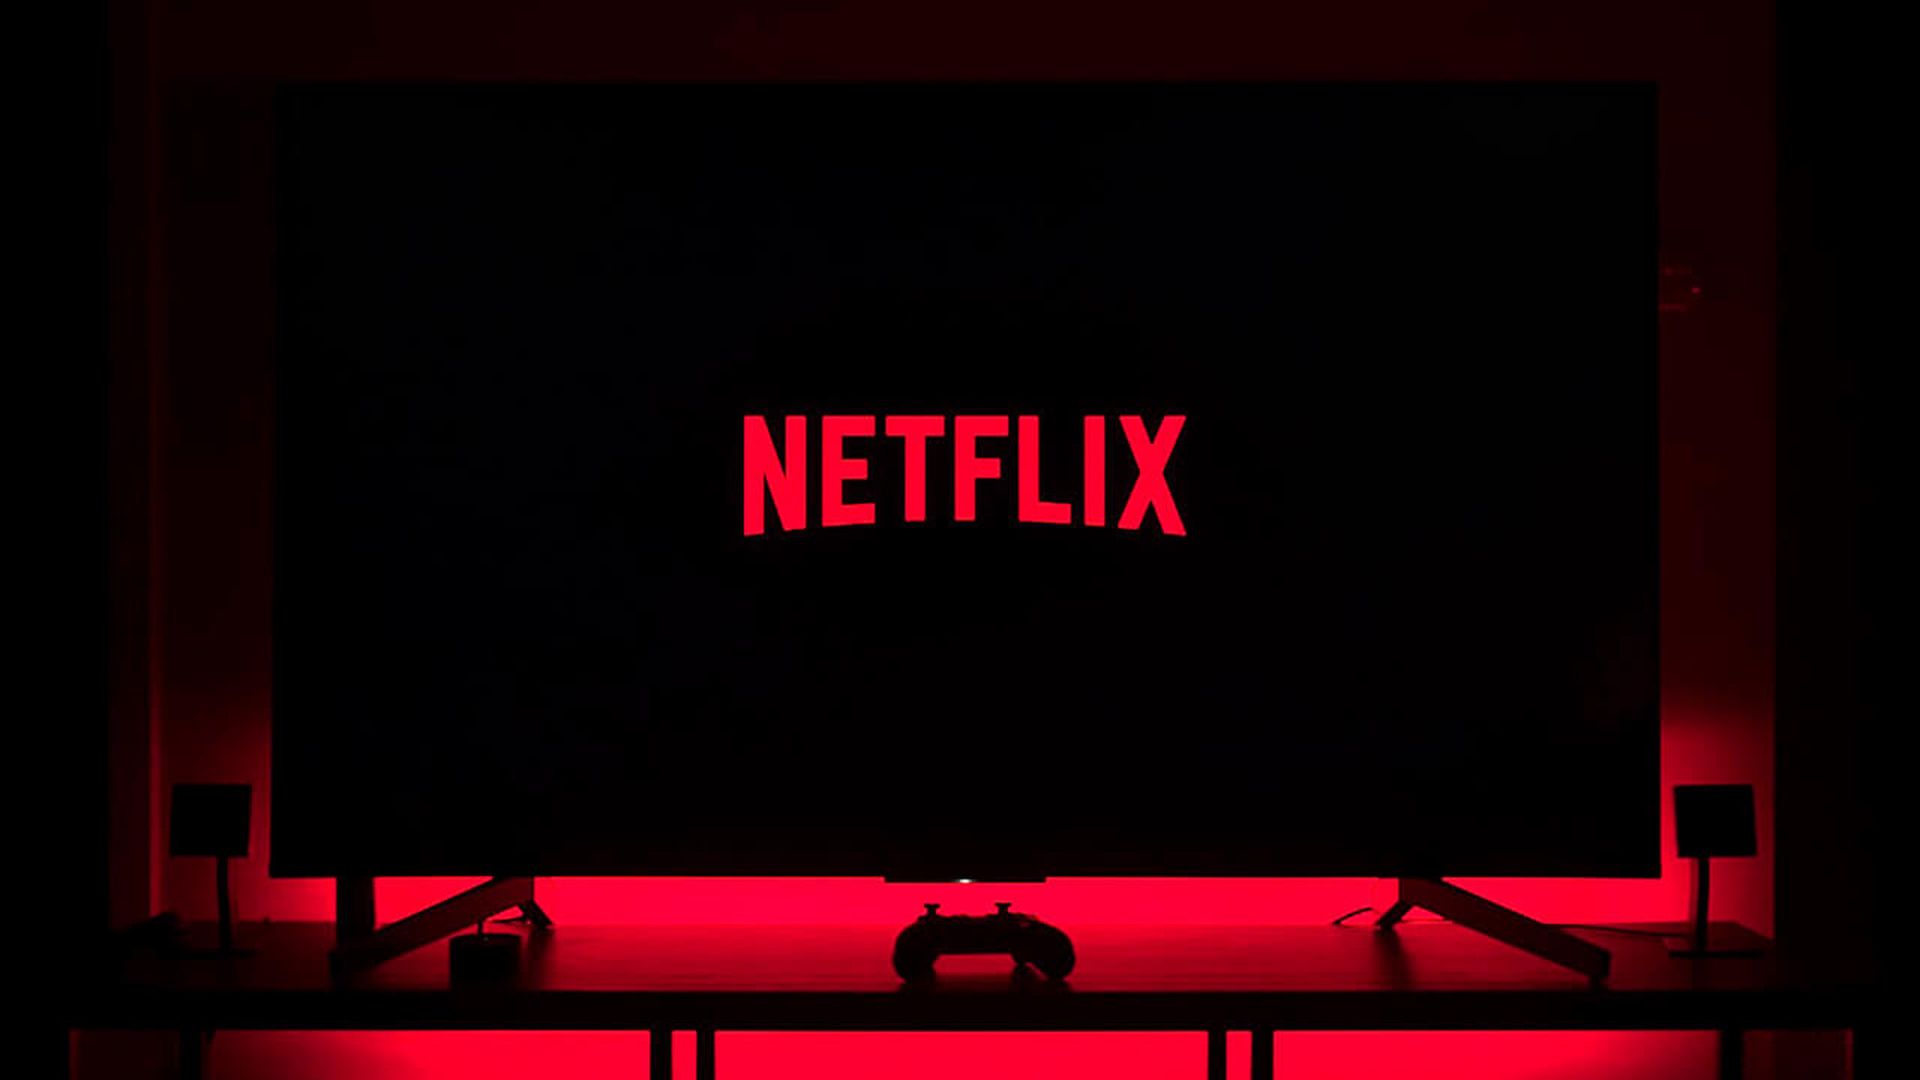 In this article, we are covering the Netflix Ubisoft partnership which aims to further improves gaming offerings from the popular streaming service.